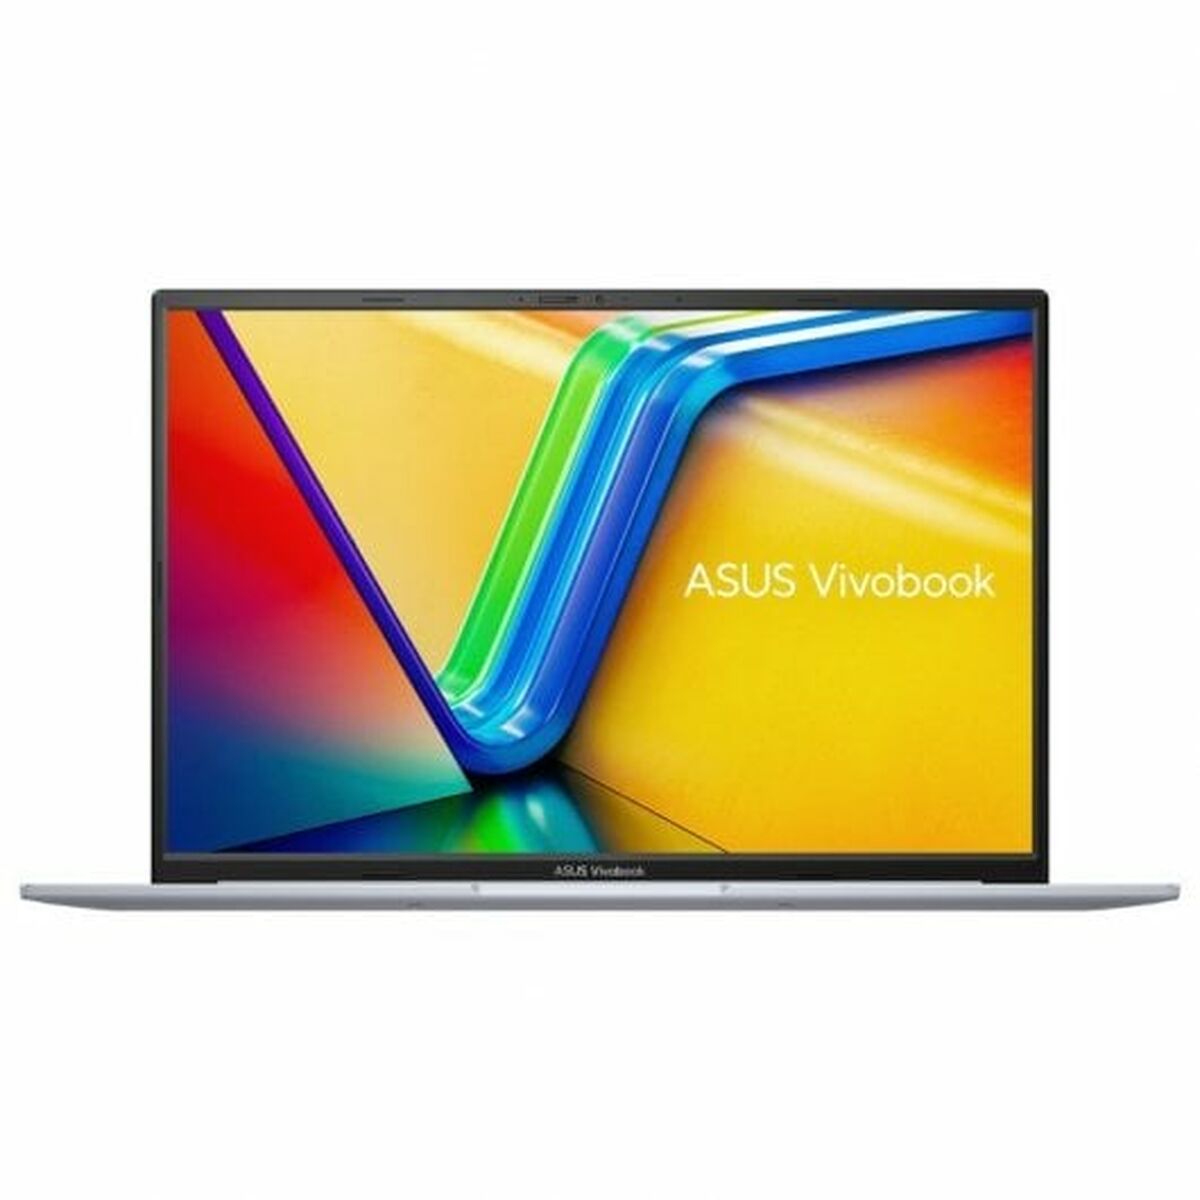 Laptop Asus VivoBook 16X K3605ZU-N1113 16" i7-12650H 16 GB RAM 512 GB SSD Nvidia Geforce RTX 4050, Asus, Computing, notebook-asus-vivobook-16x-k3605zu-n1113-512-gb-ssd-16-gb-ram-16-i7-12650h, :2-in-1, :512 GB, :Intel-i7, :RAM 16 GB, :Touchscreen, Brand_Asus, category-reference-2609, category-reference-2791, category-reference-2797, category-reference-t-19685, Condition_NEW, office, Price_+ 1000, Teleworking, RiotNook